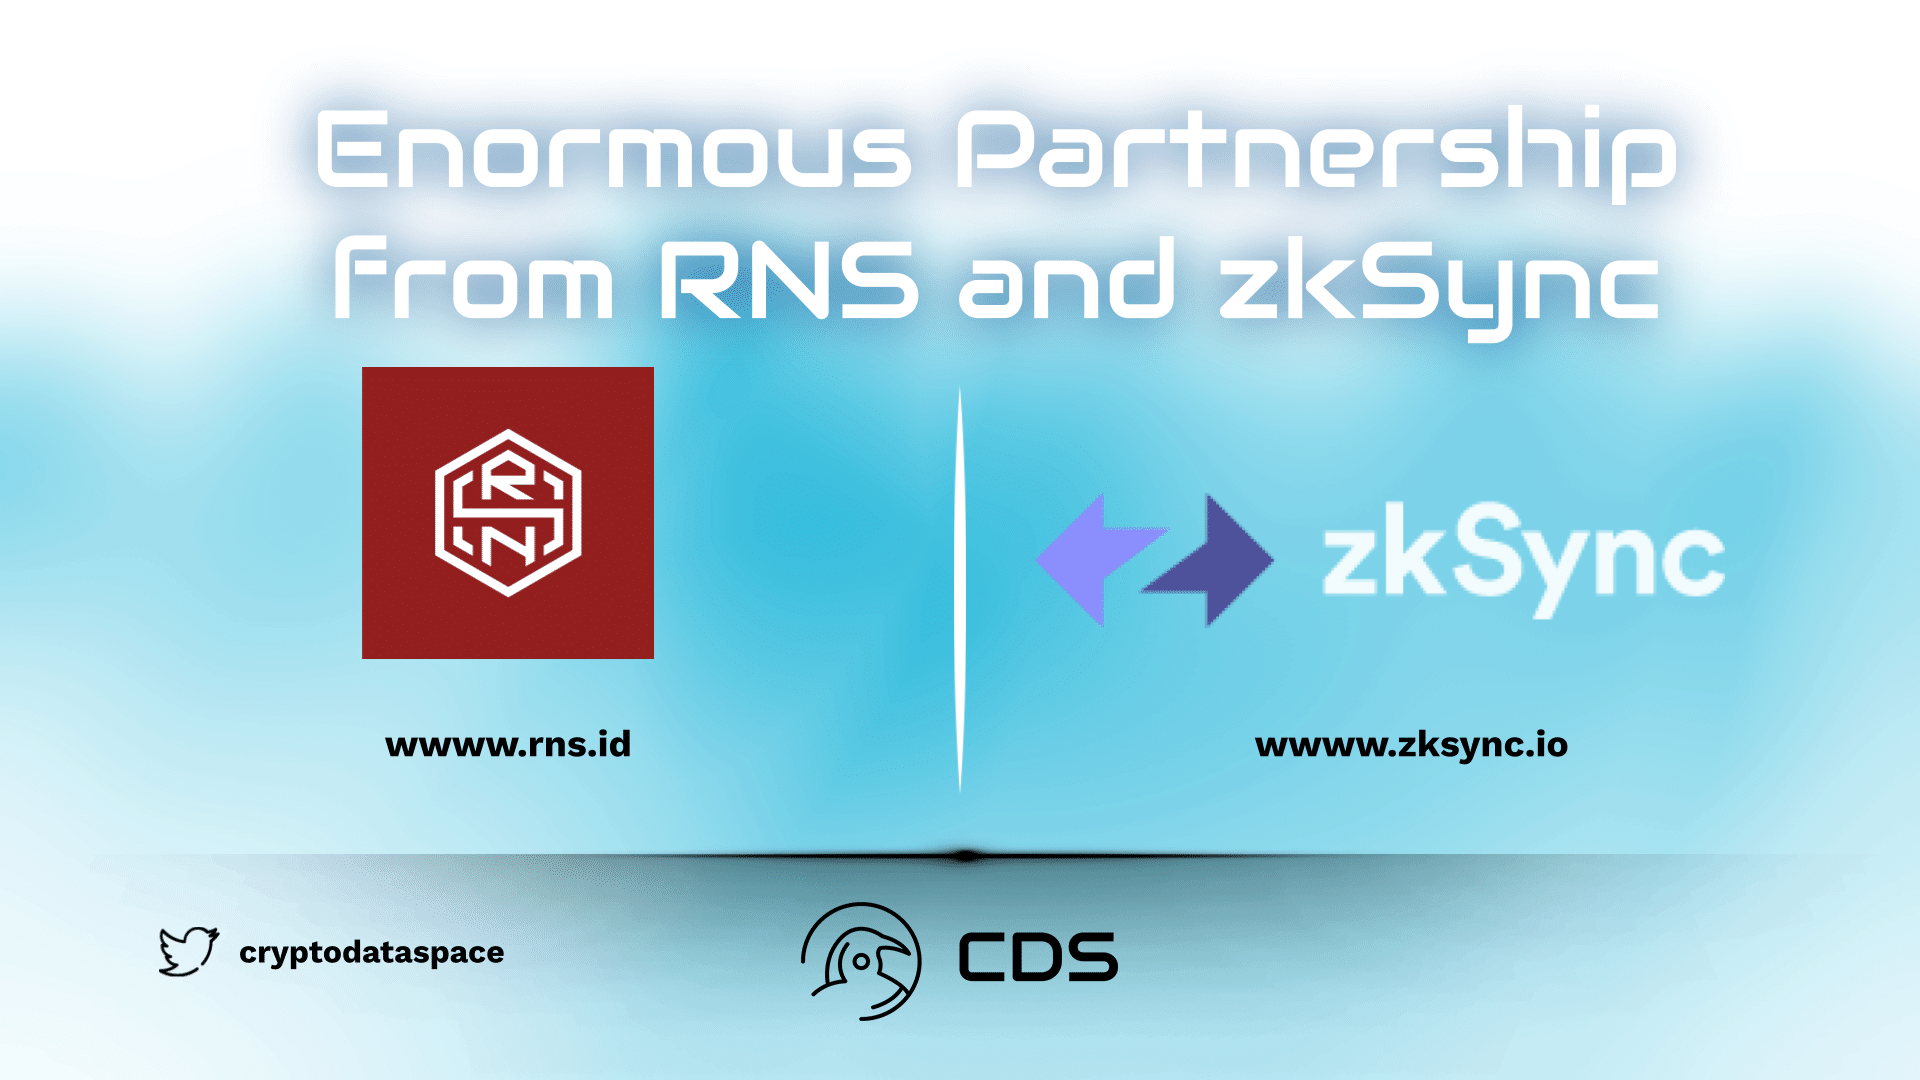 Enormous Partnership from RNS and zkSync